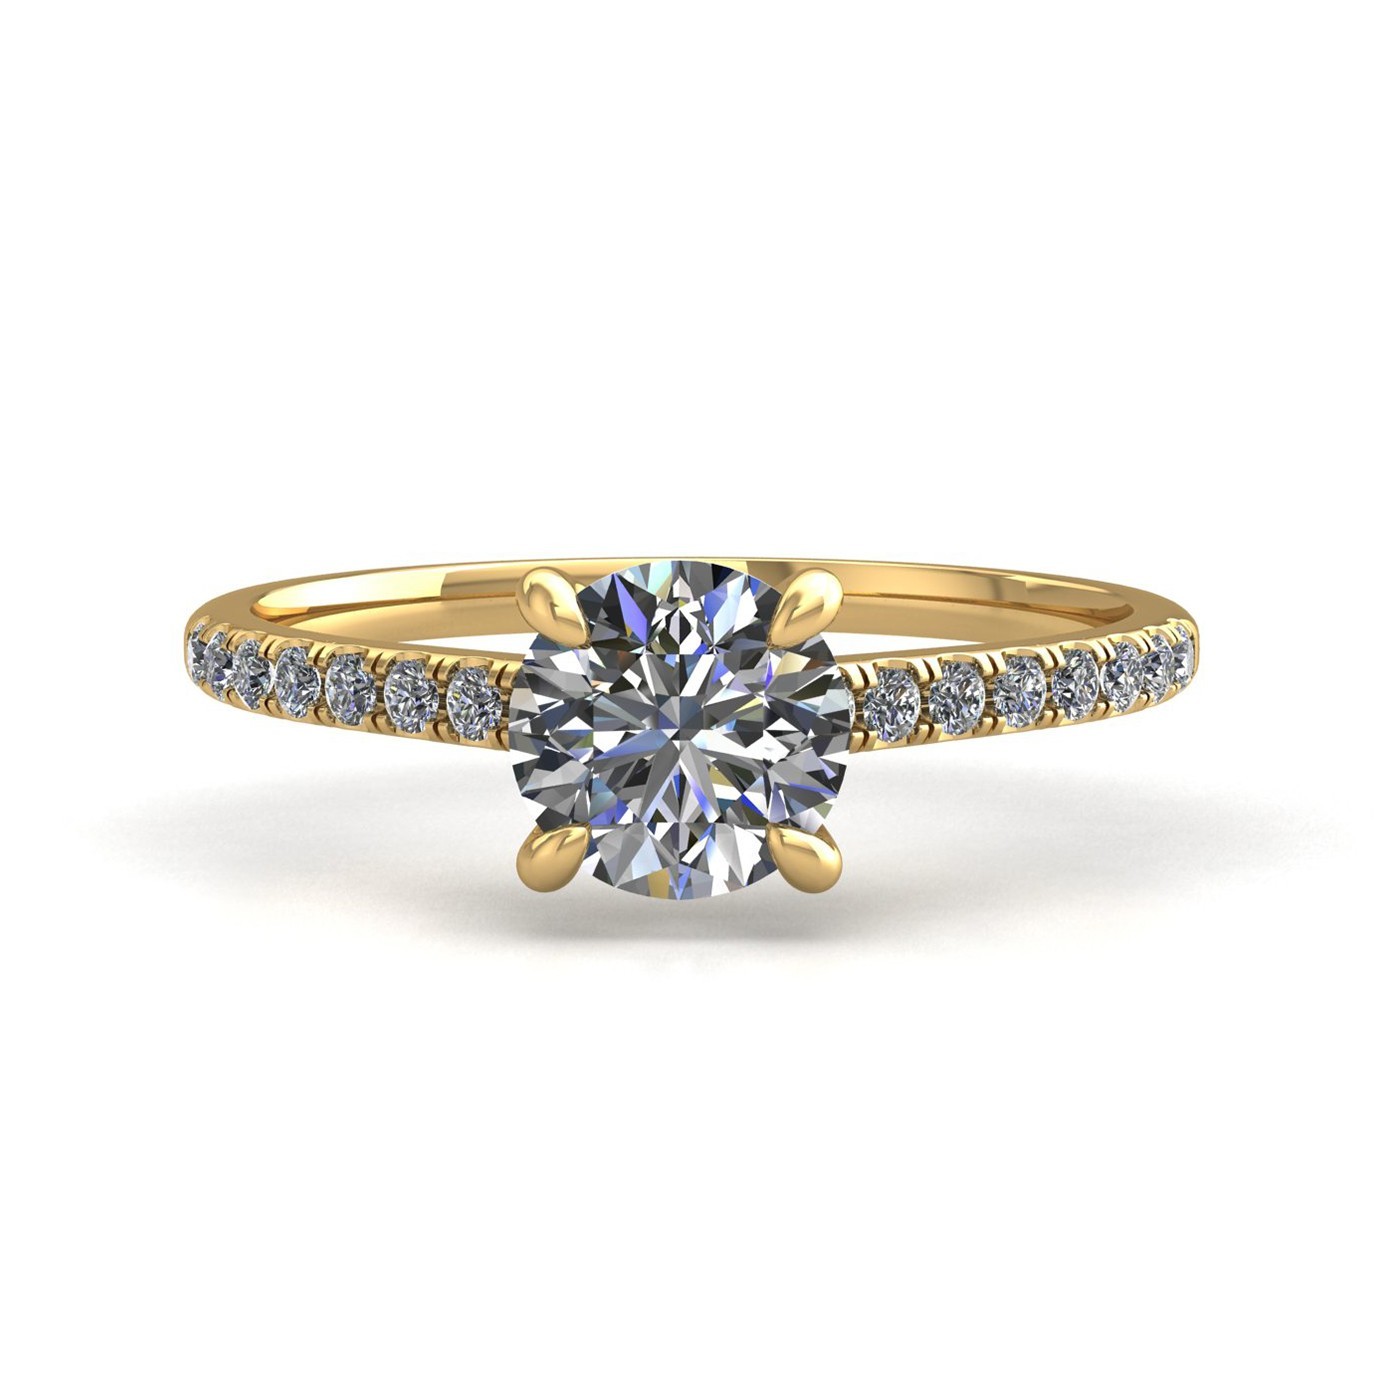 18k yellow gold  0,30 ct 4 prongs round cut diamond engagement ring with whisper thin pavÉ set band Photos & images